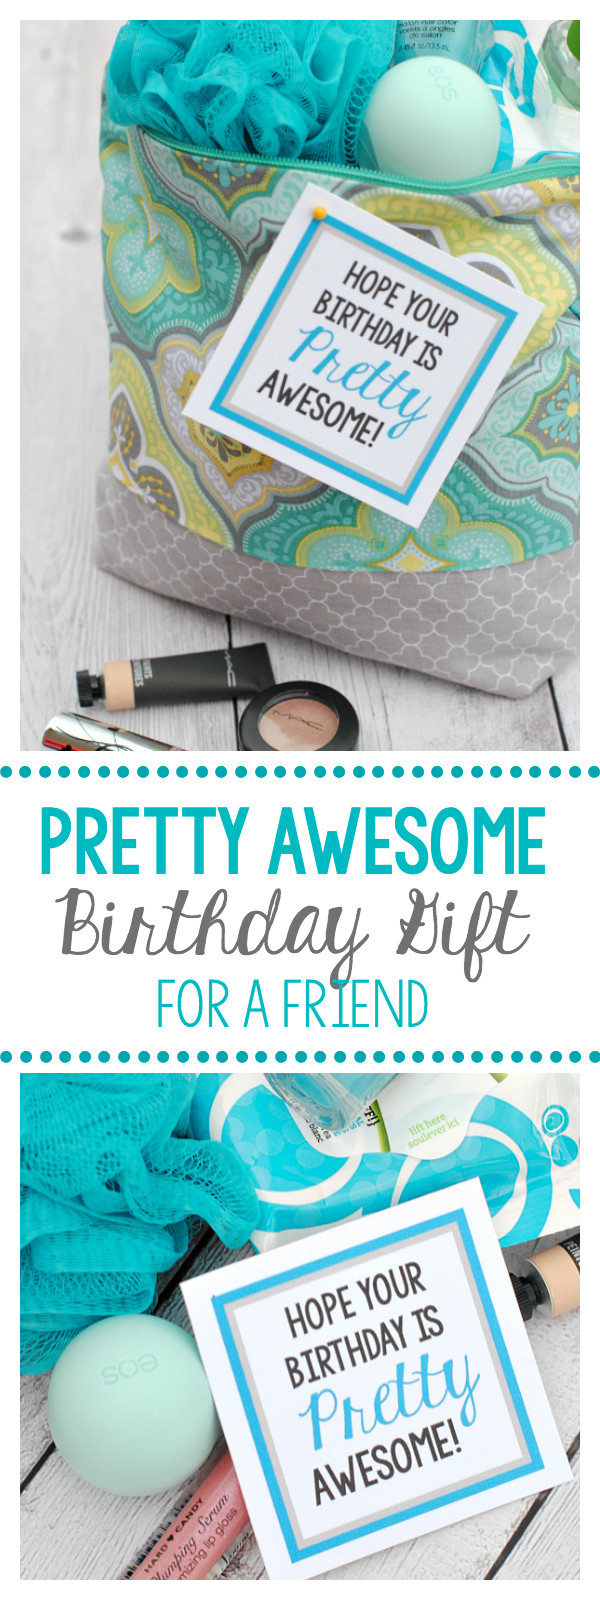 Awesome Birthday Gifts
 "Pretty Awesome" Makeup Gifts for a Friend Mom or Teacher